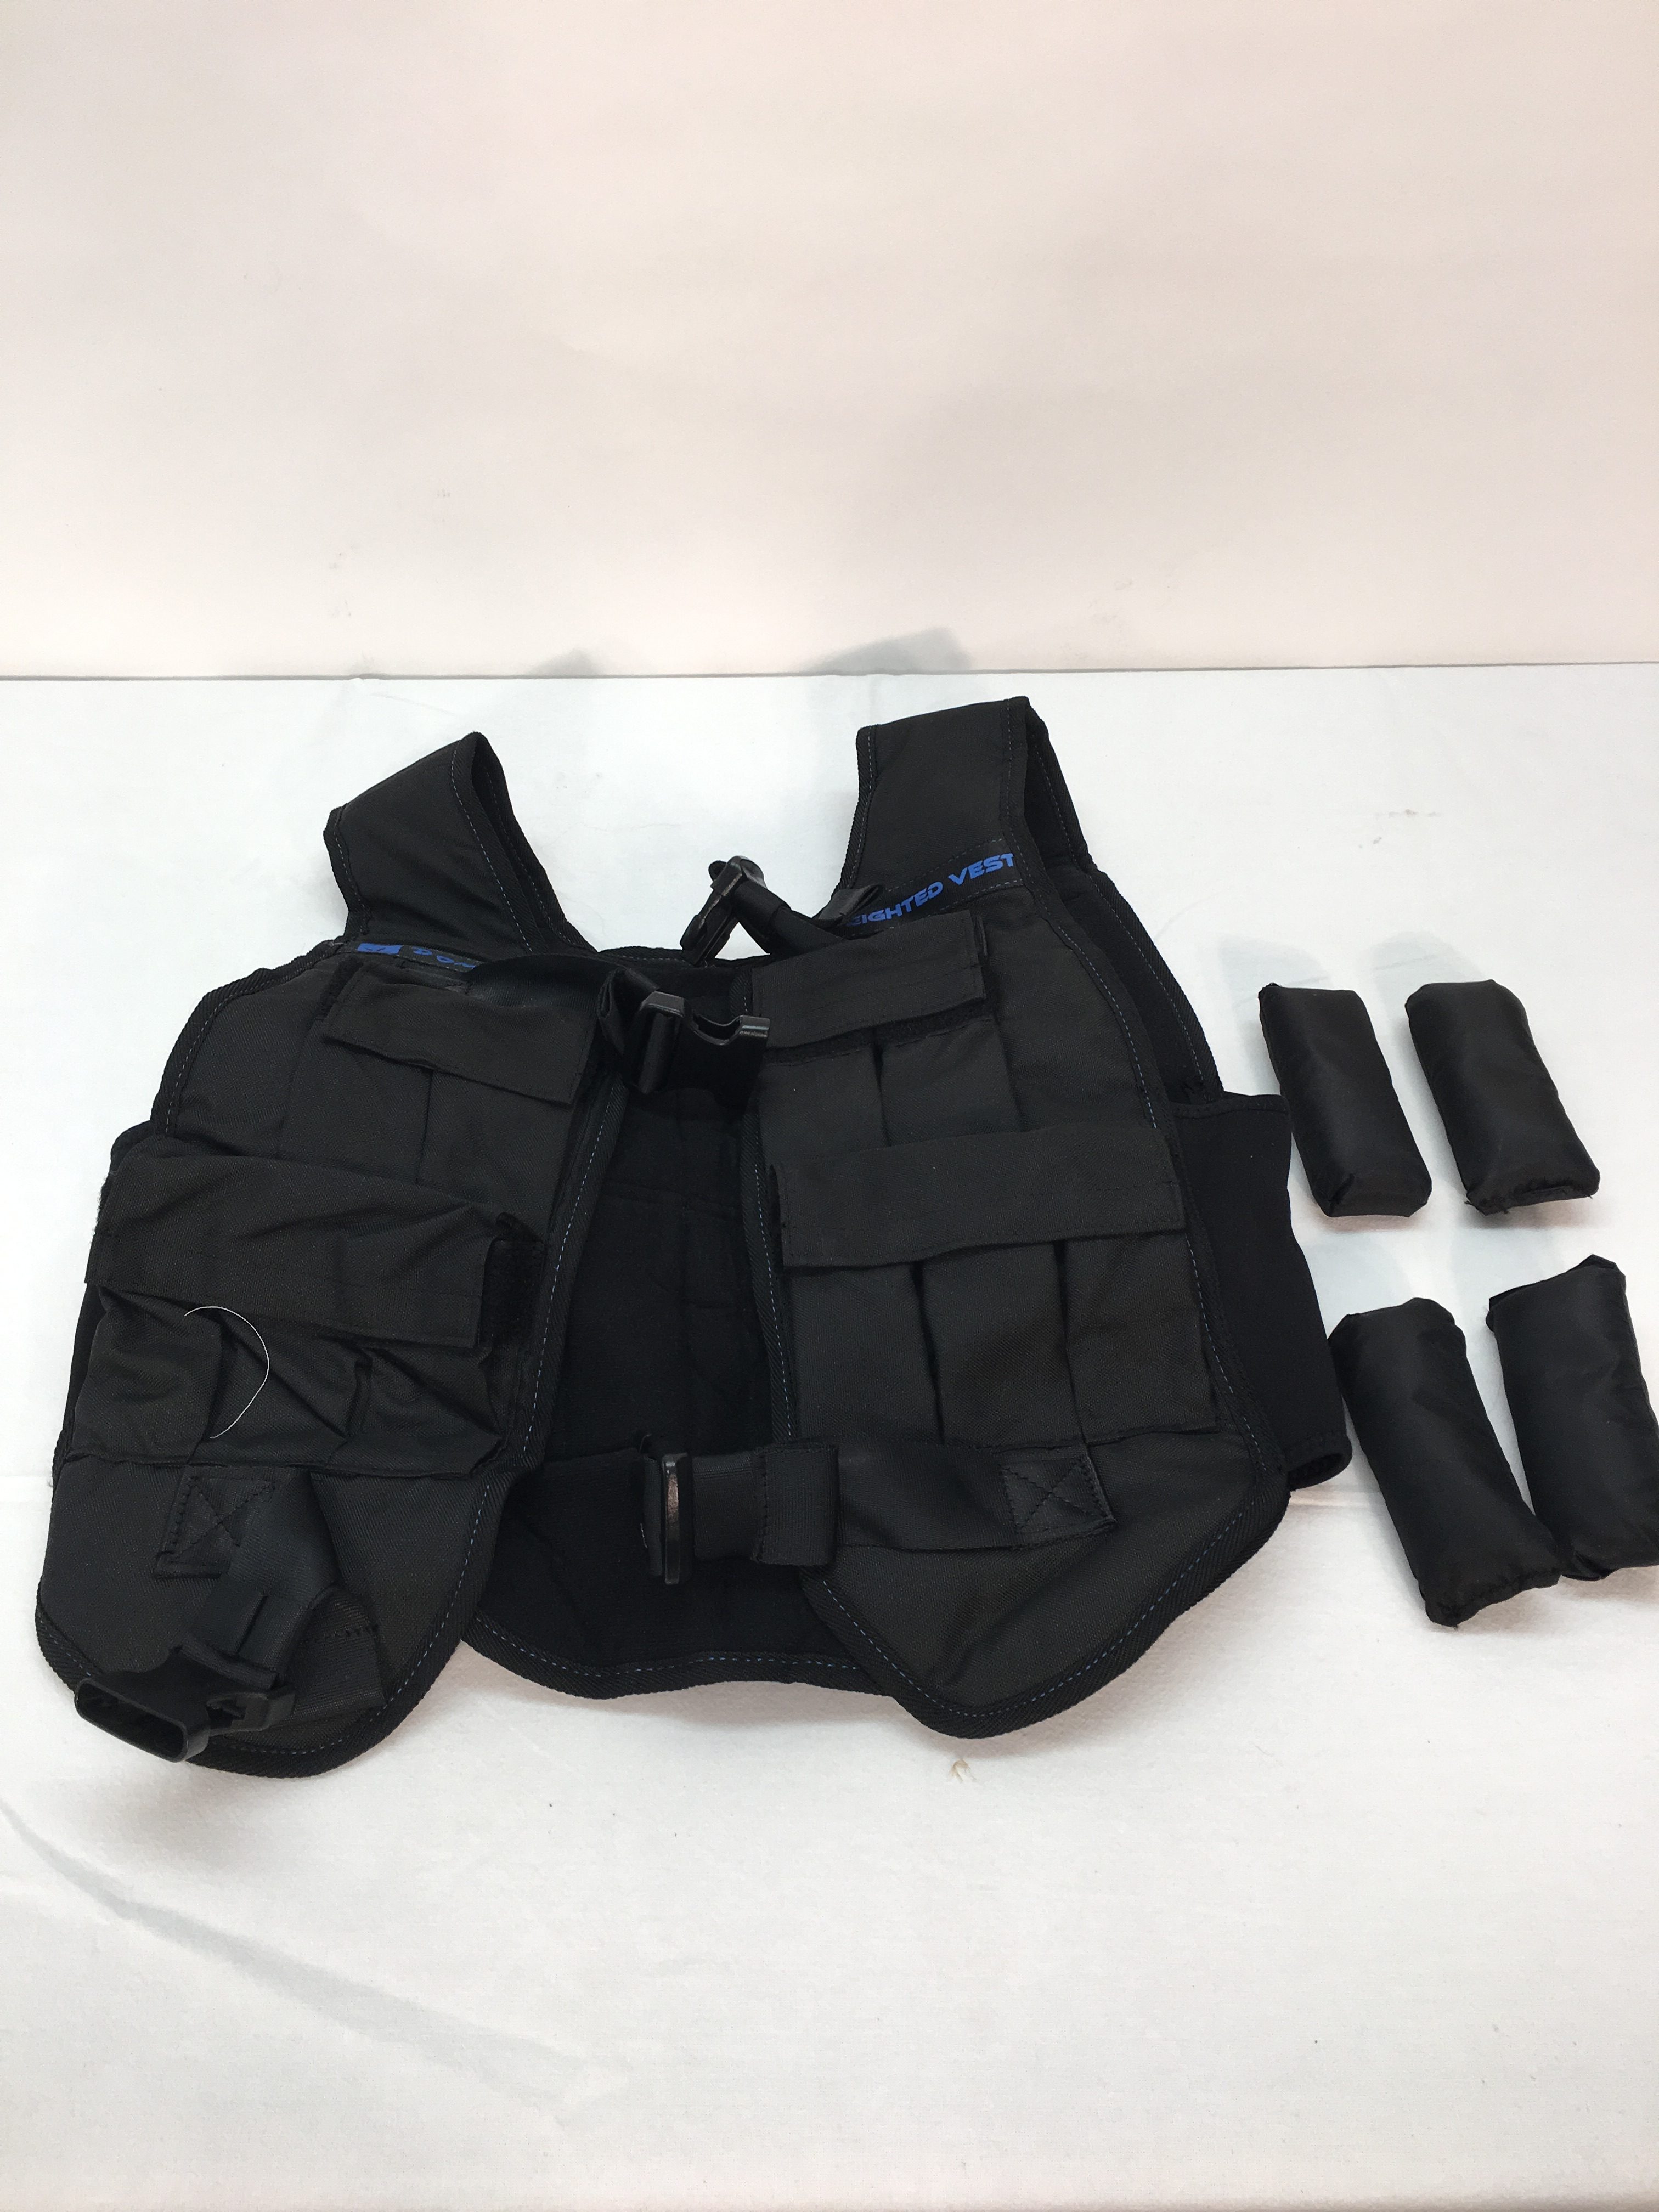 Weighted Jacket | Prop Hire and Deliver